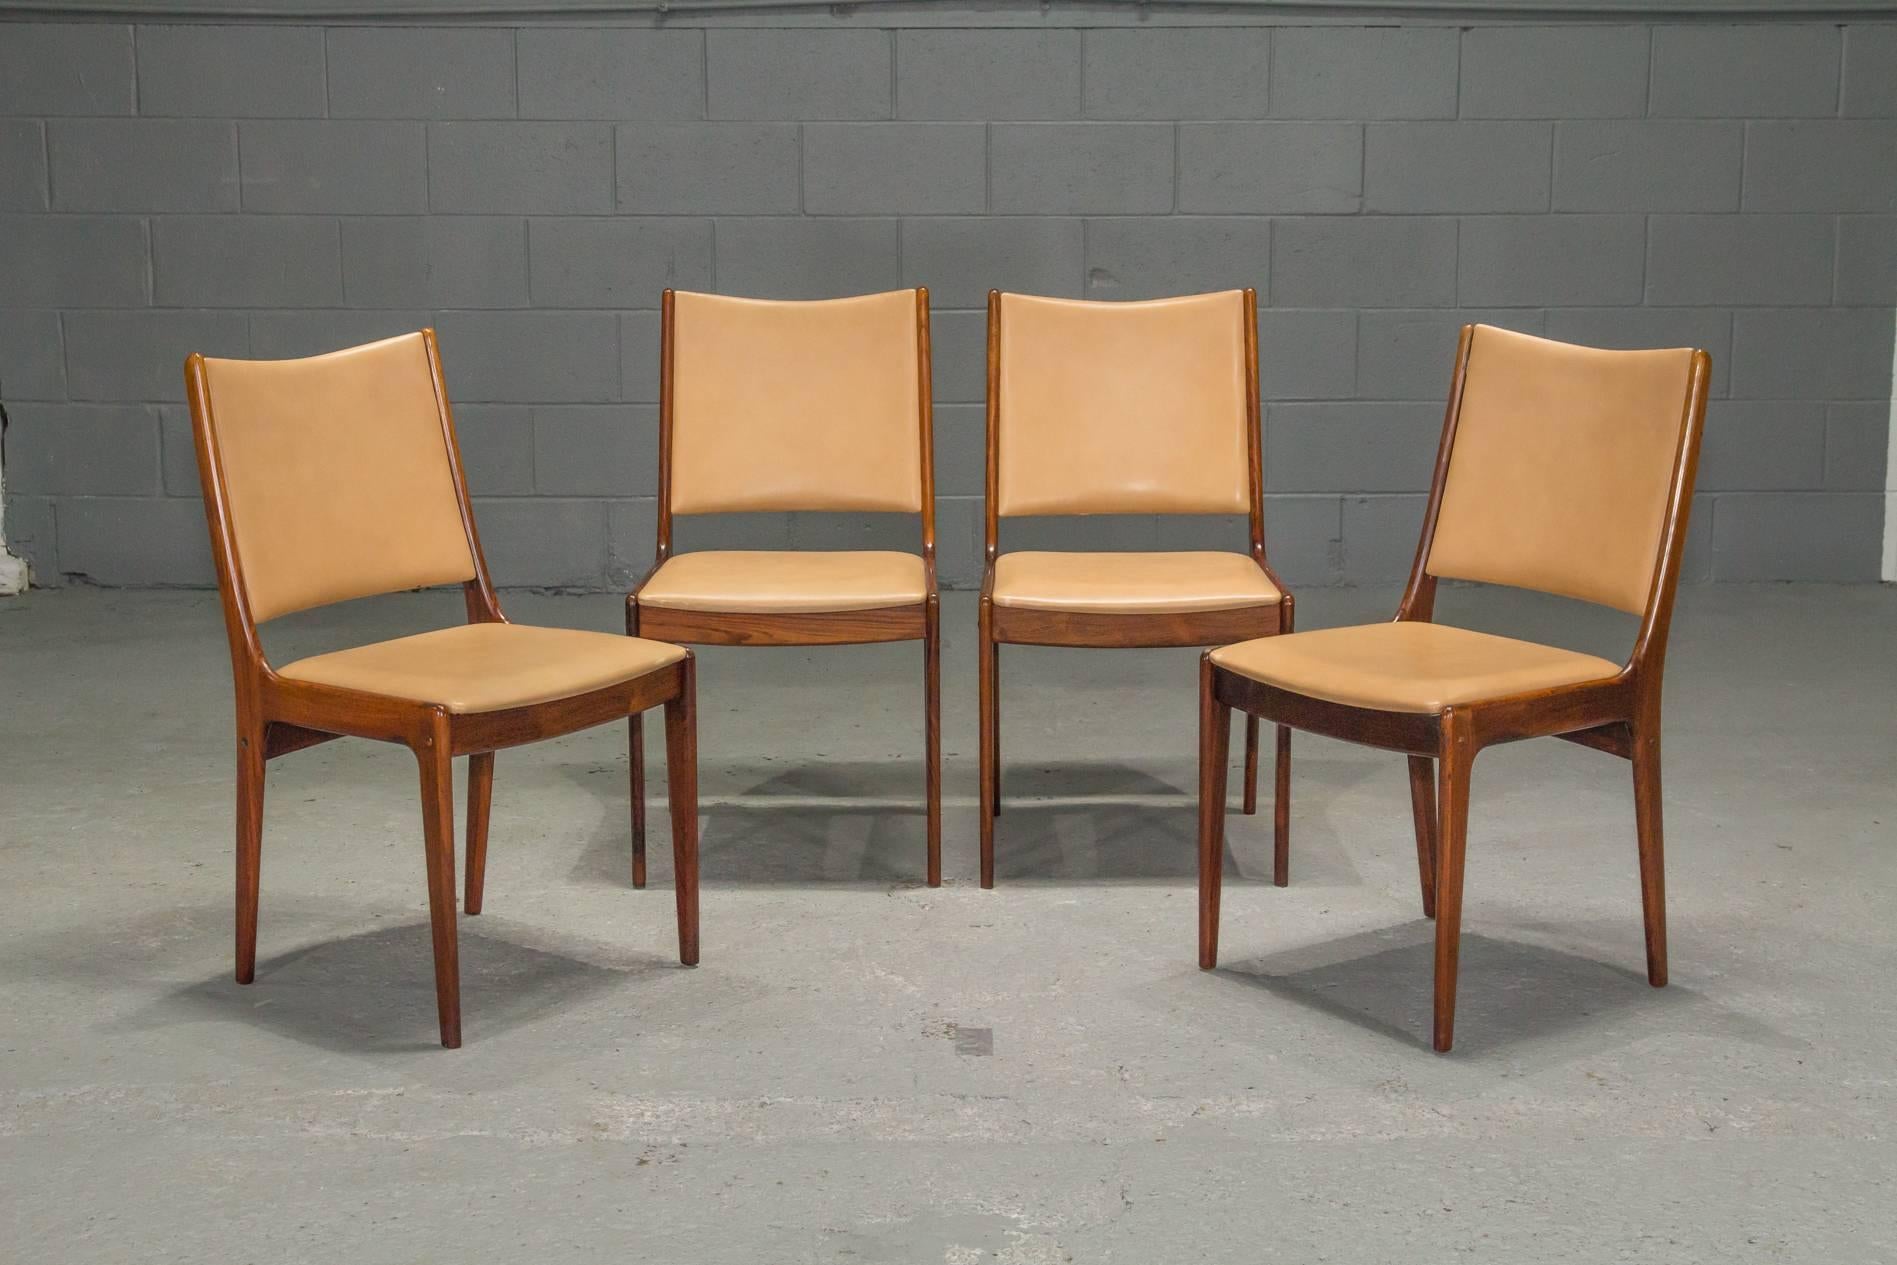 Set of 4 Danish Modern Rosewood and Leather Dining Chairs.